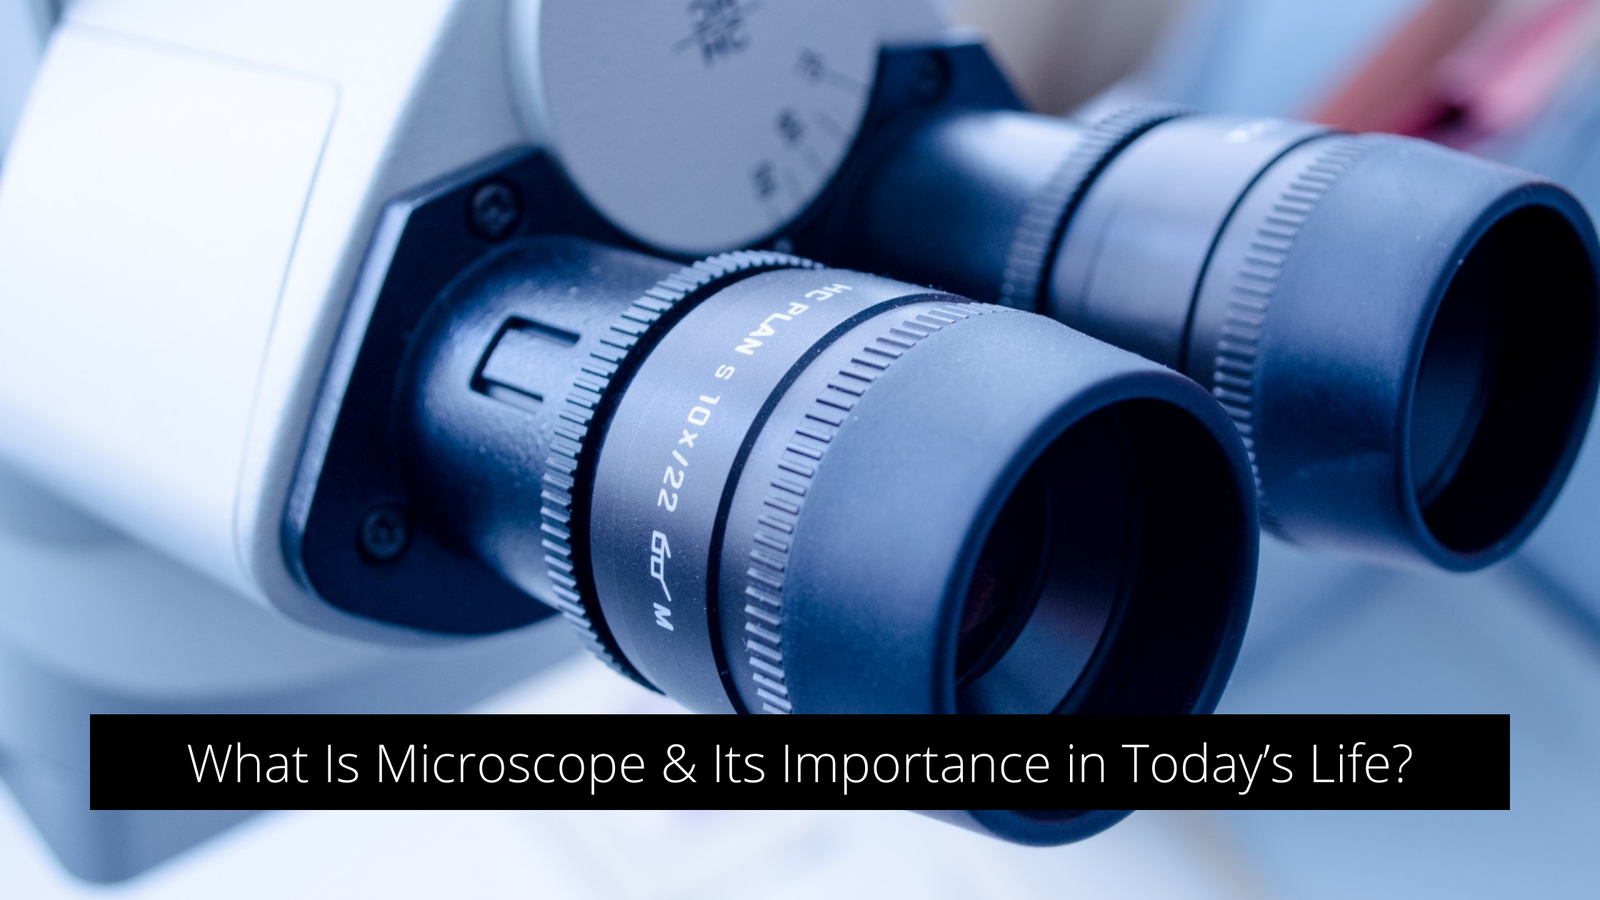 What Is Microscope & Its Importance in Today’s Life